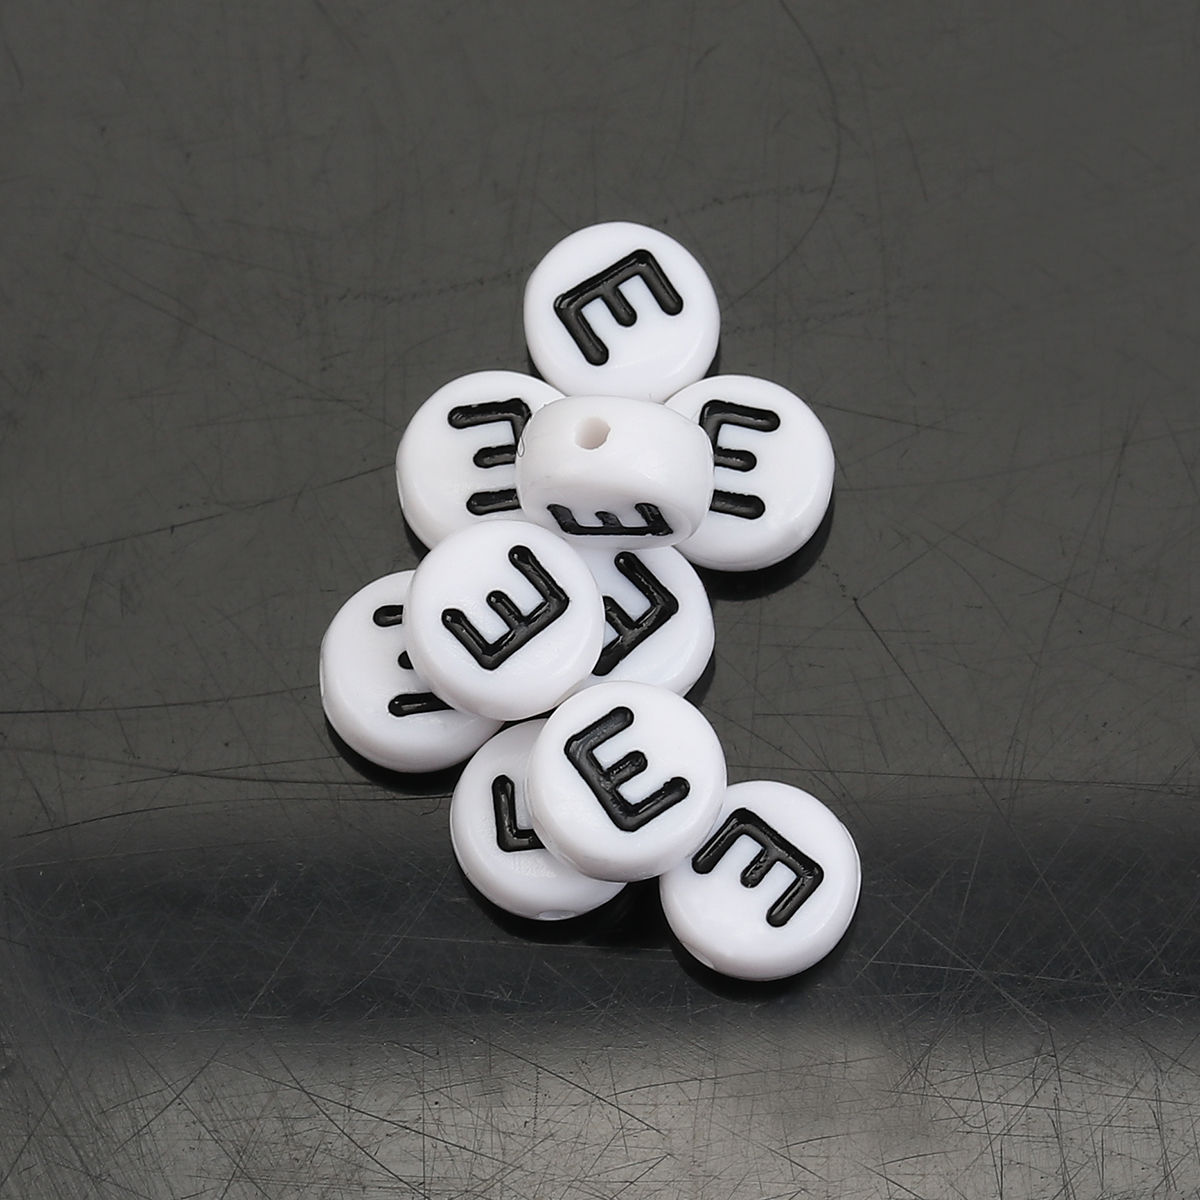 Picture of Acrylic Spacer Beads Round White Alphabet/ Letter "E" About 7mm Dia, Hole: Approx 1mm, 500 PCs